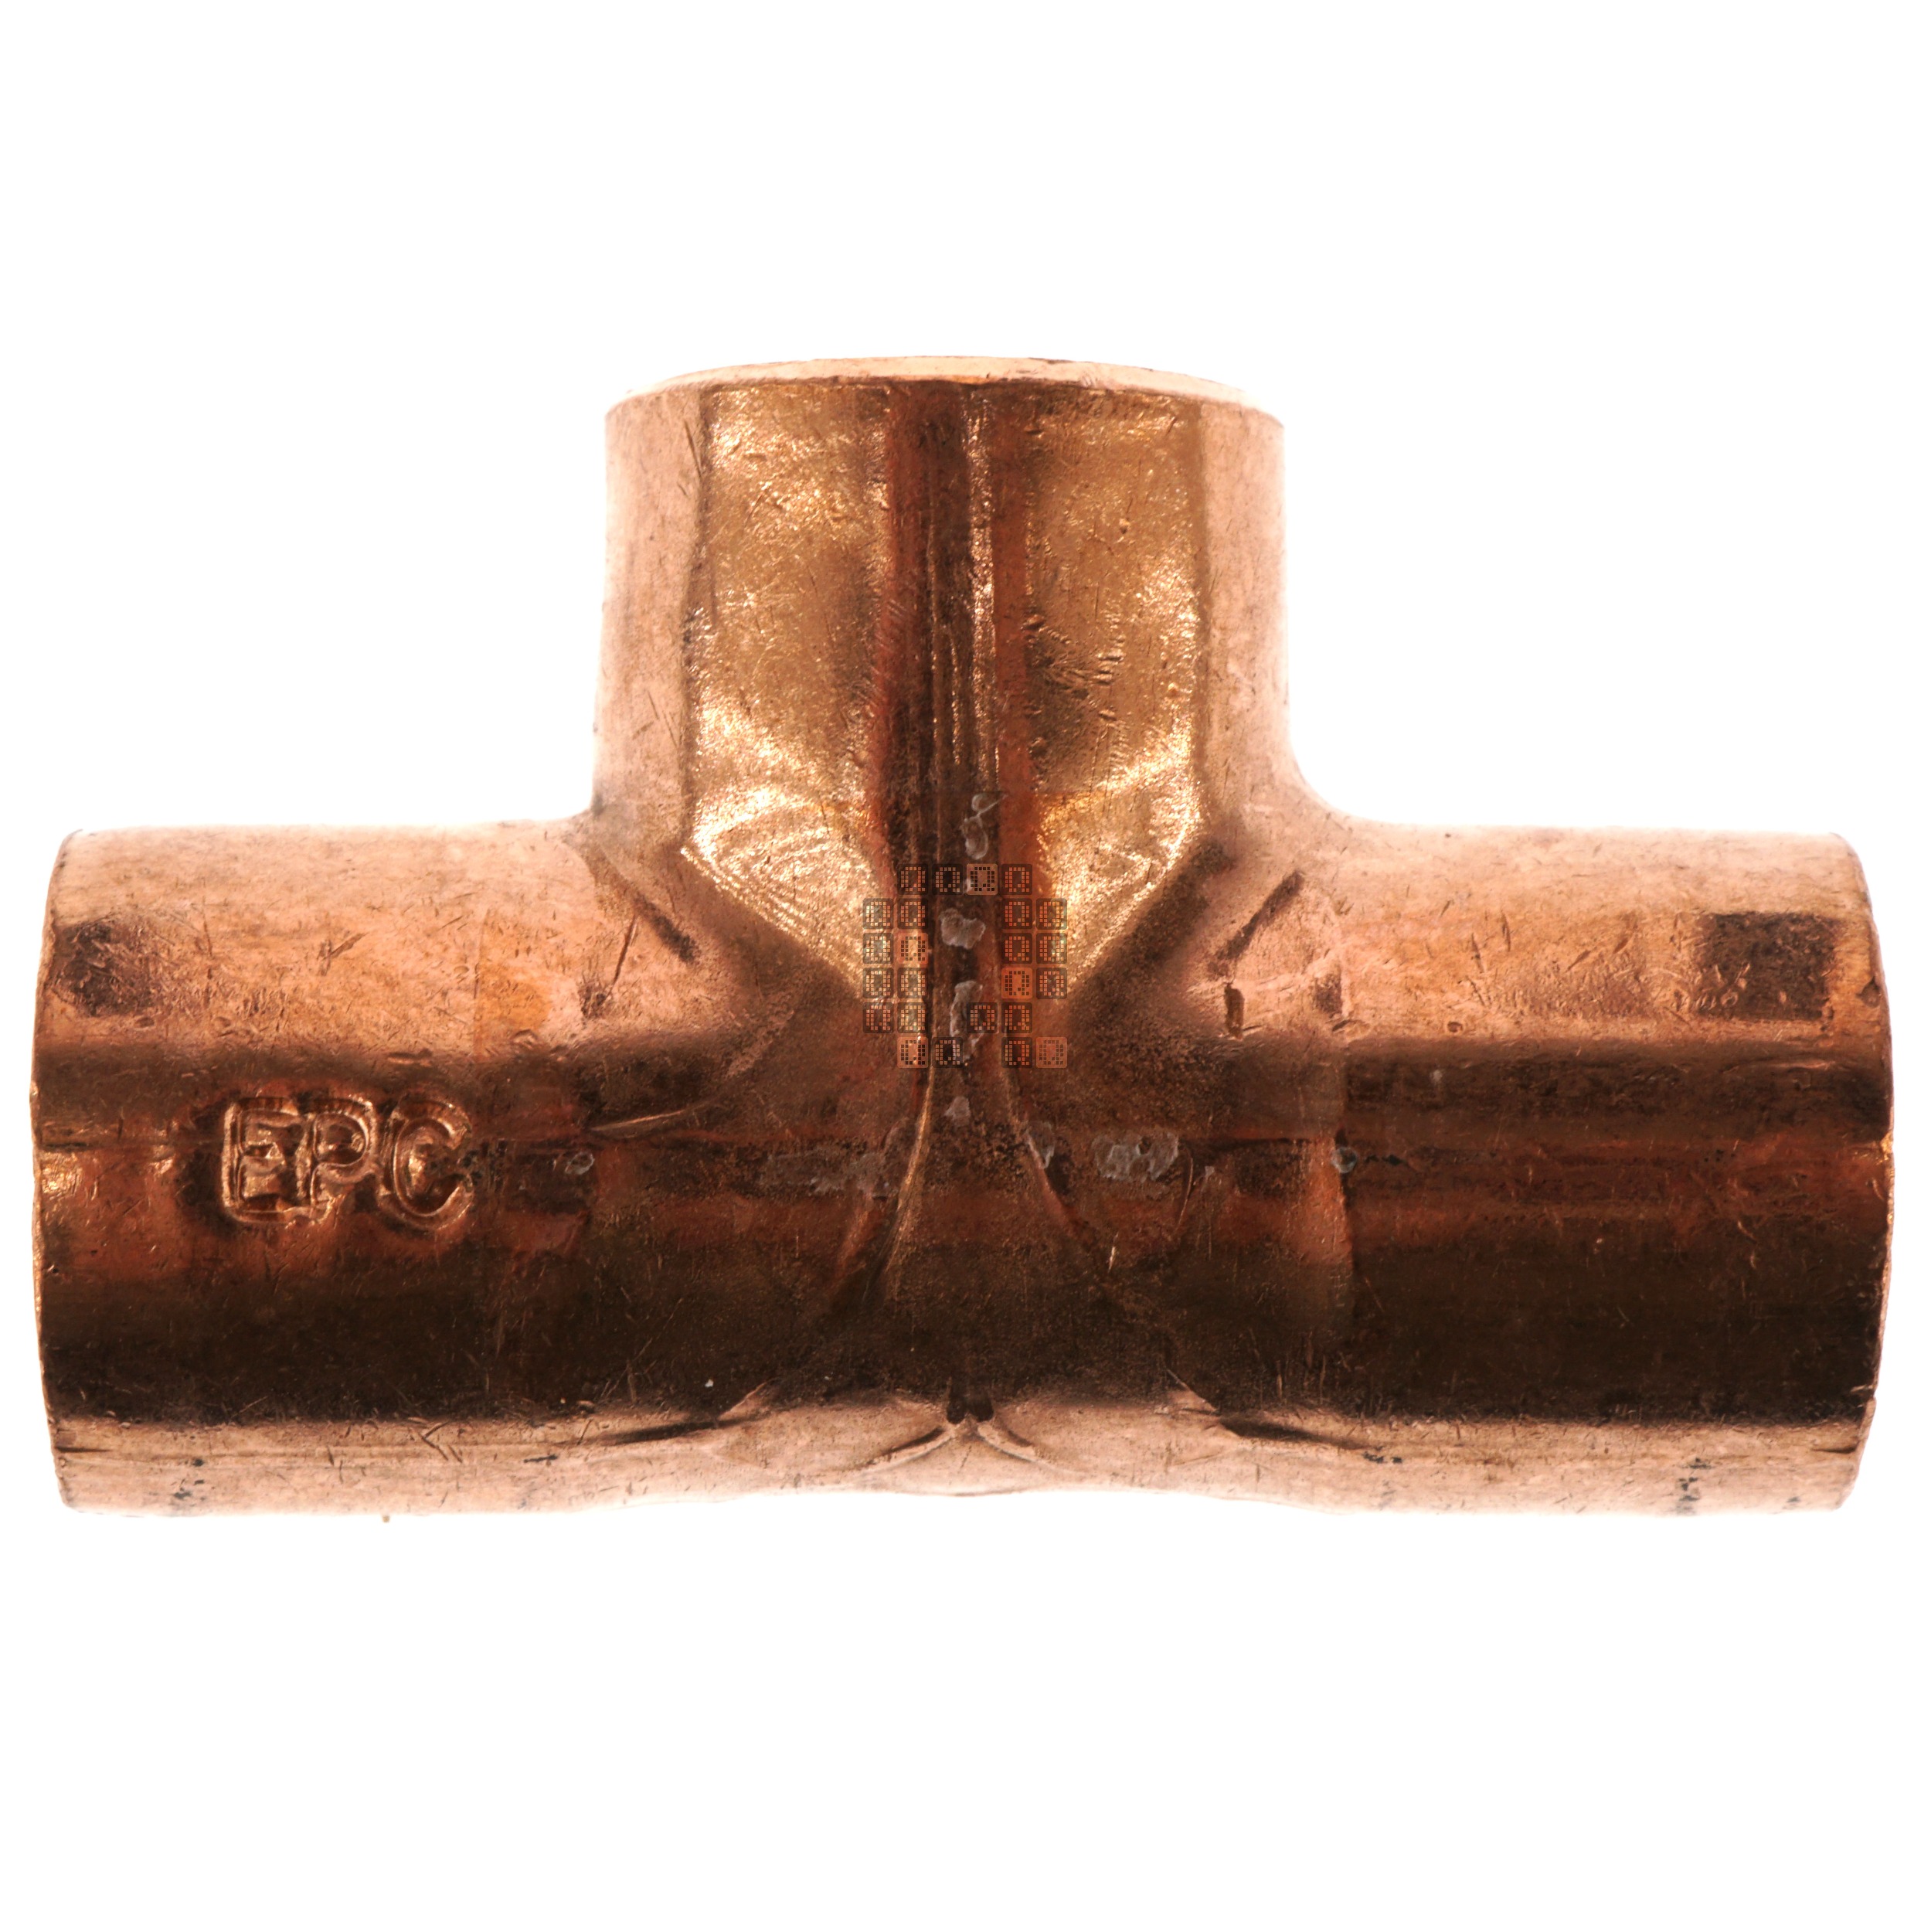 Elkhart Products 32700 Wrot 1/2" Copper Pipe Tee, Sweat, Series 111 with Stop